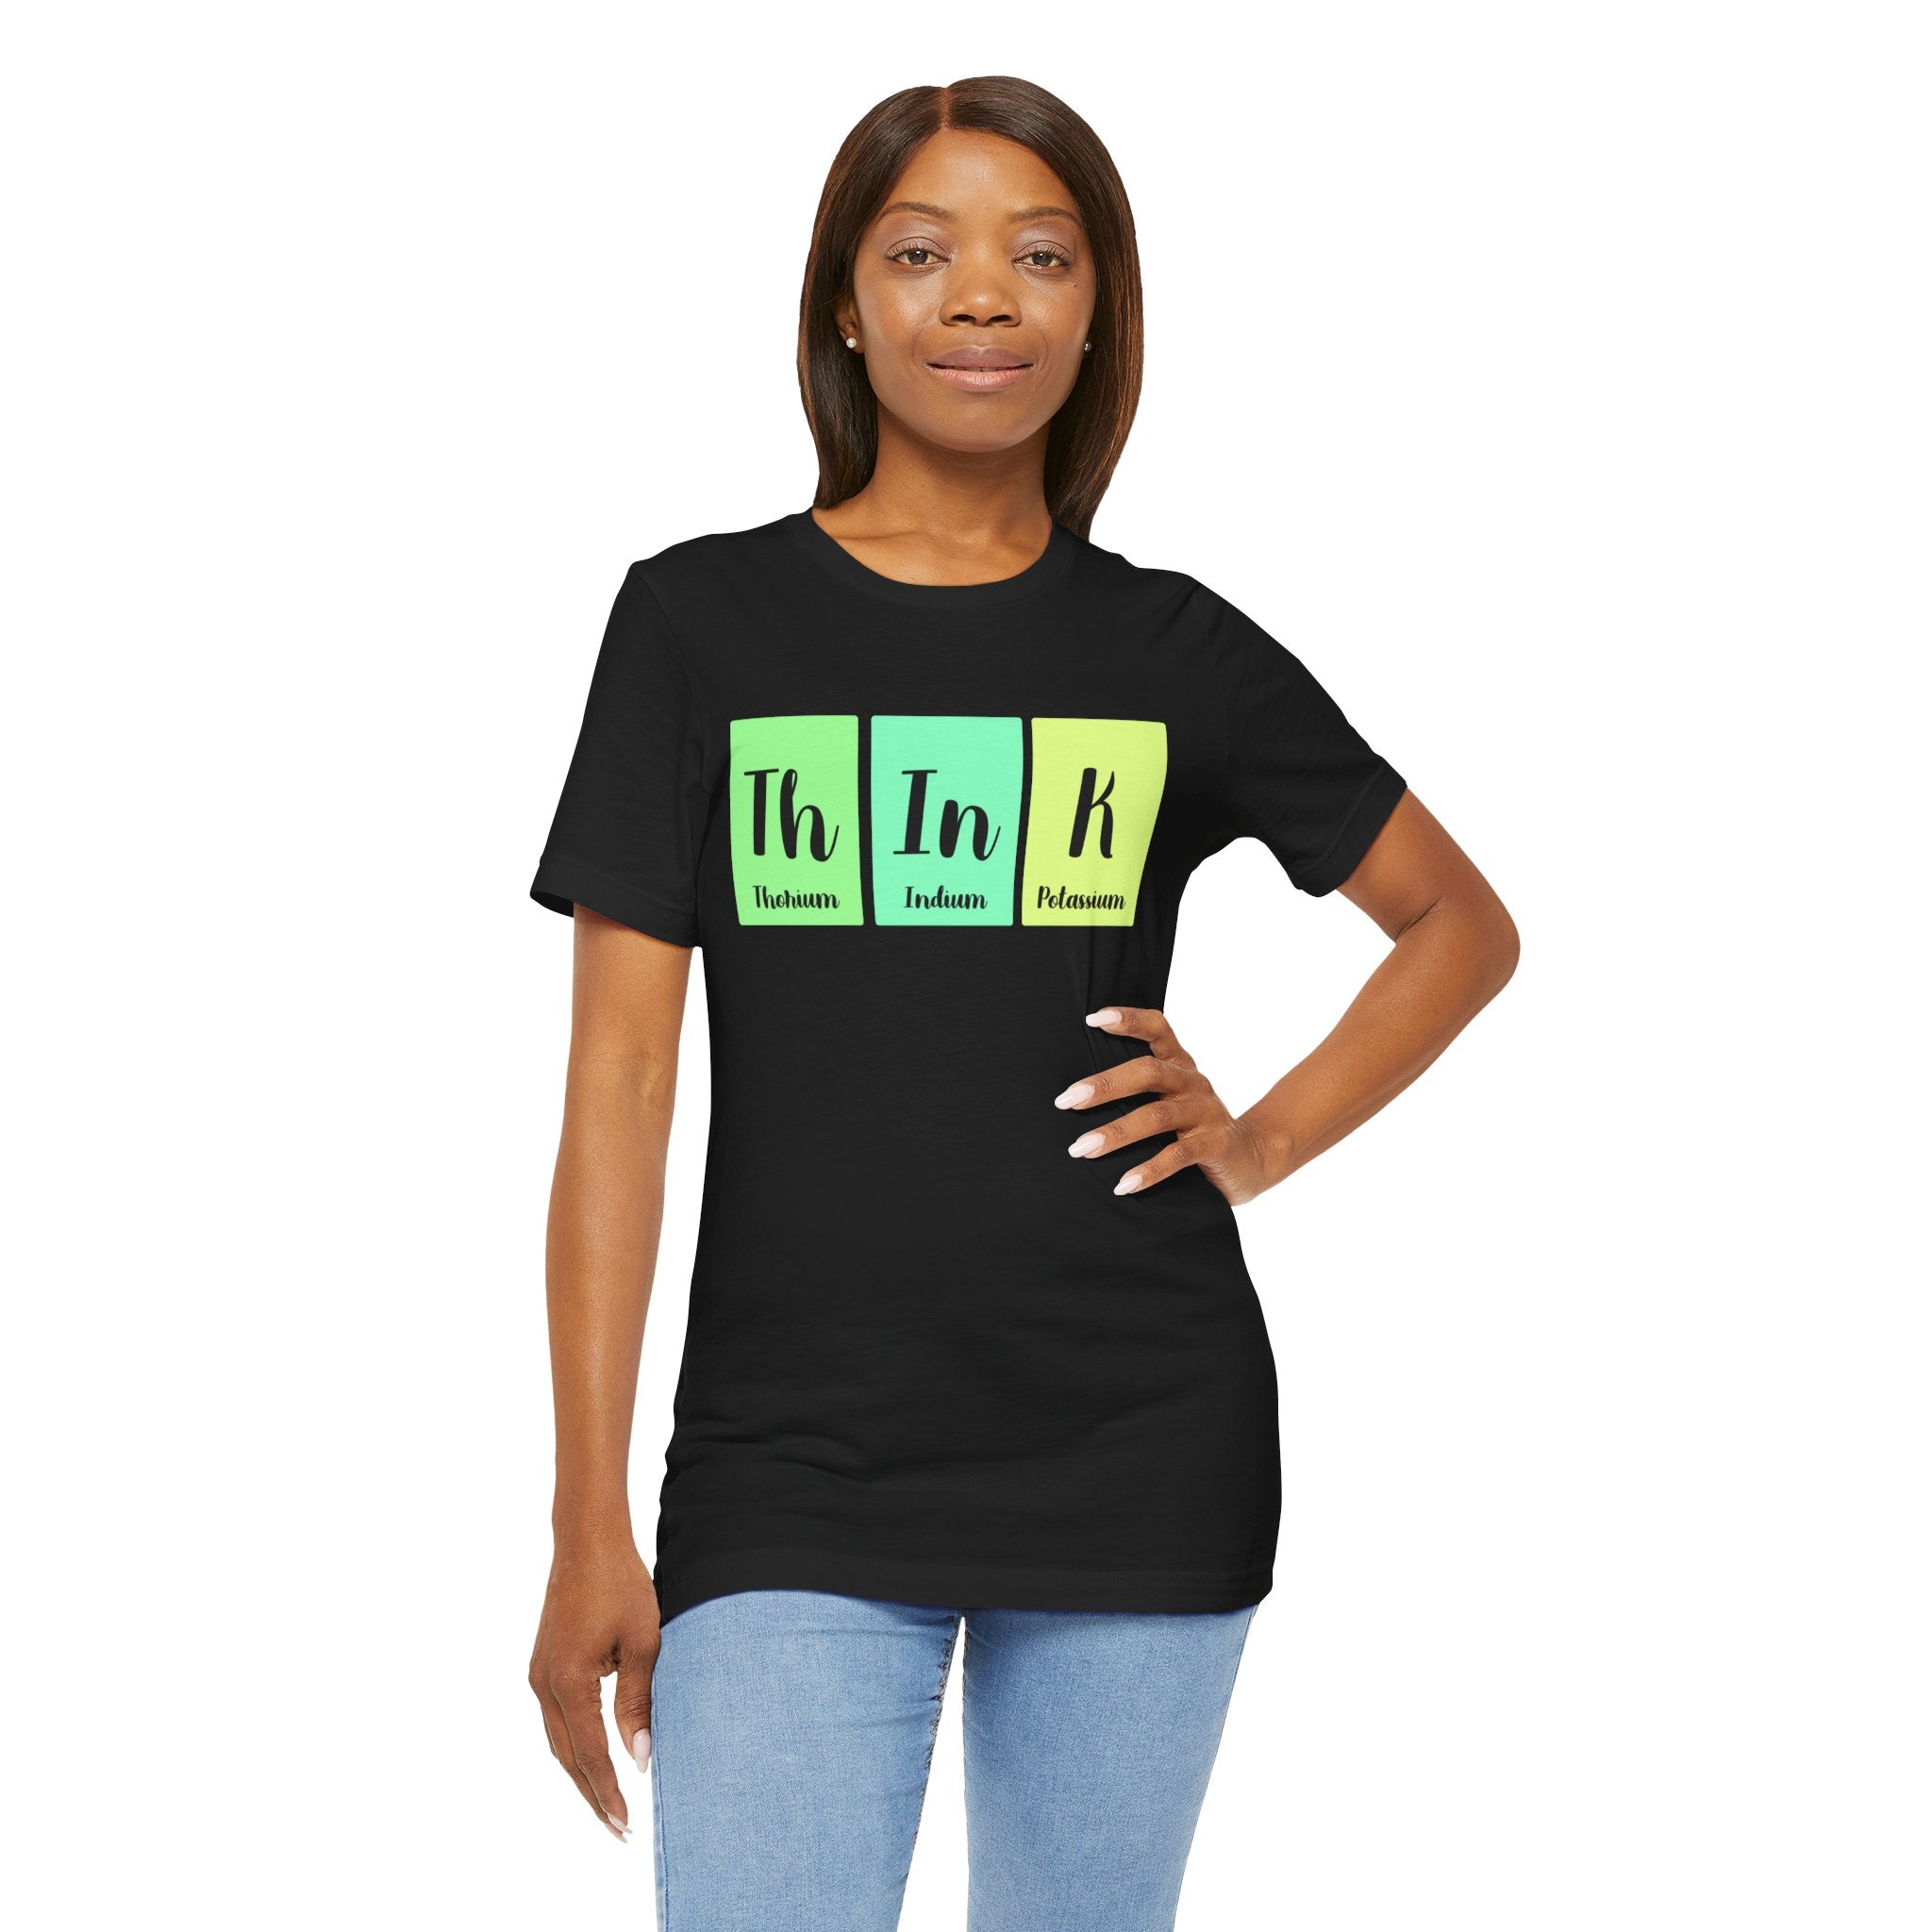 A woman standing, wearing a Th-In-k jersey tee in black with "th in k" in green and blue lettering representing thorium, indium, and potassium elements.